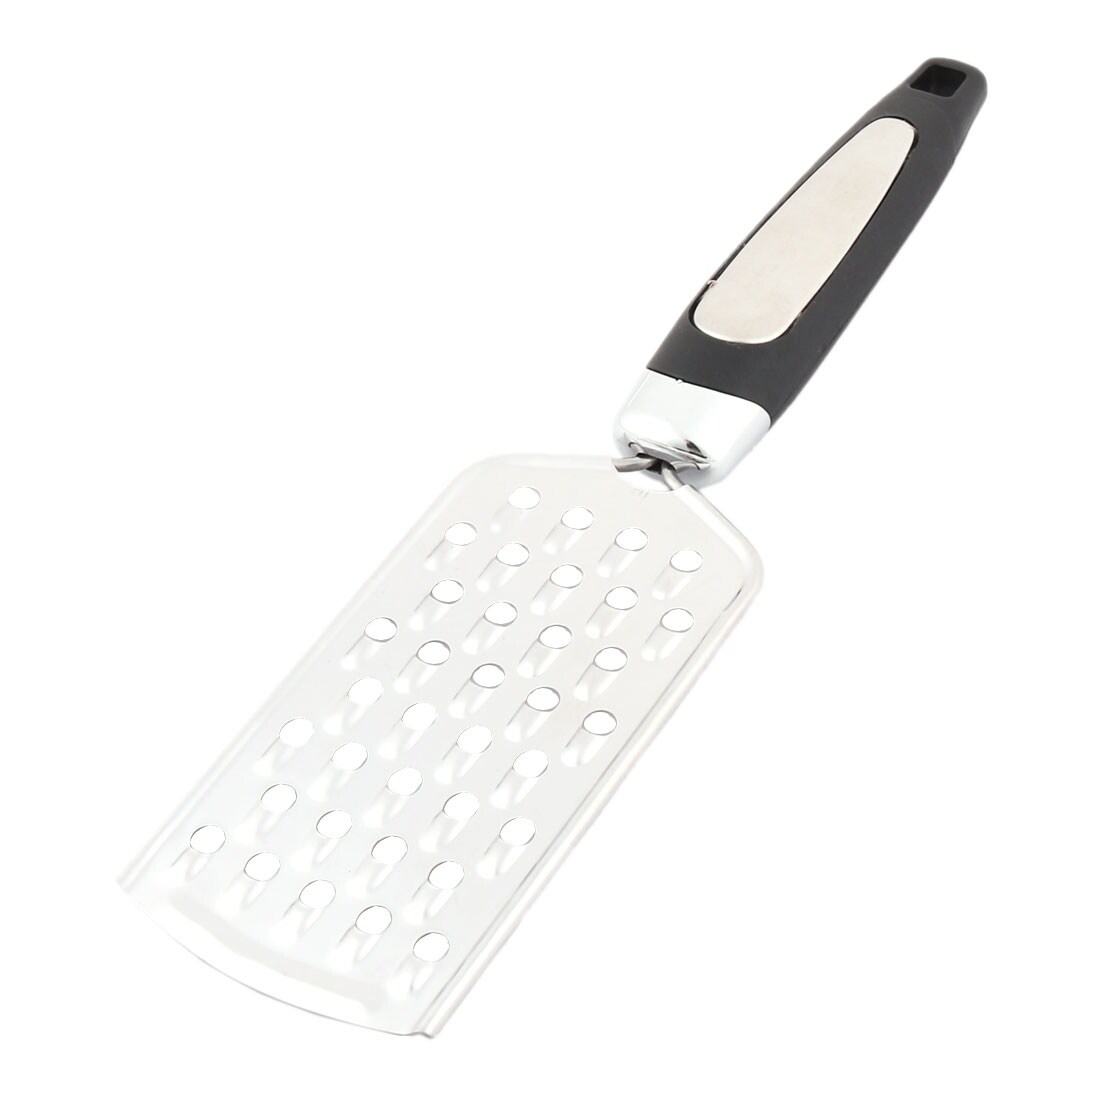 Unique Bargains Cheese Grater Stainless Steeel With Handle